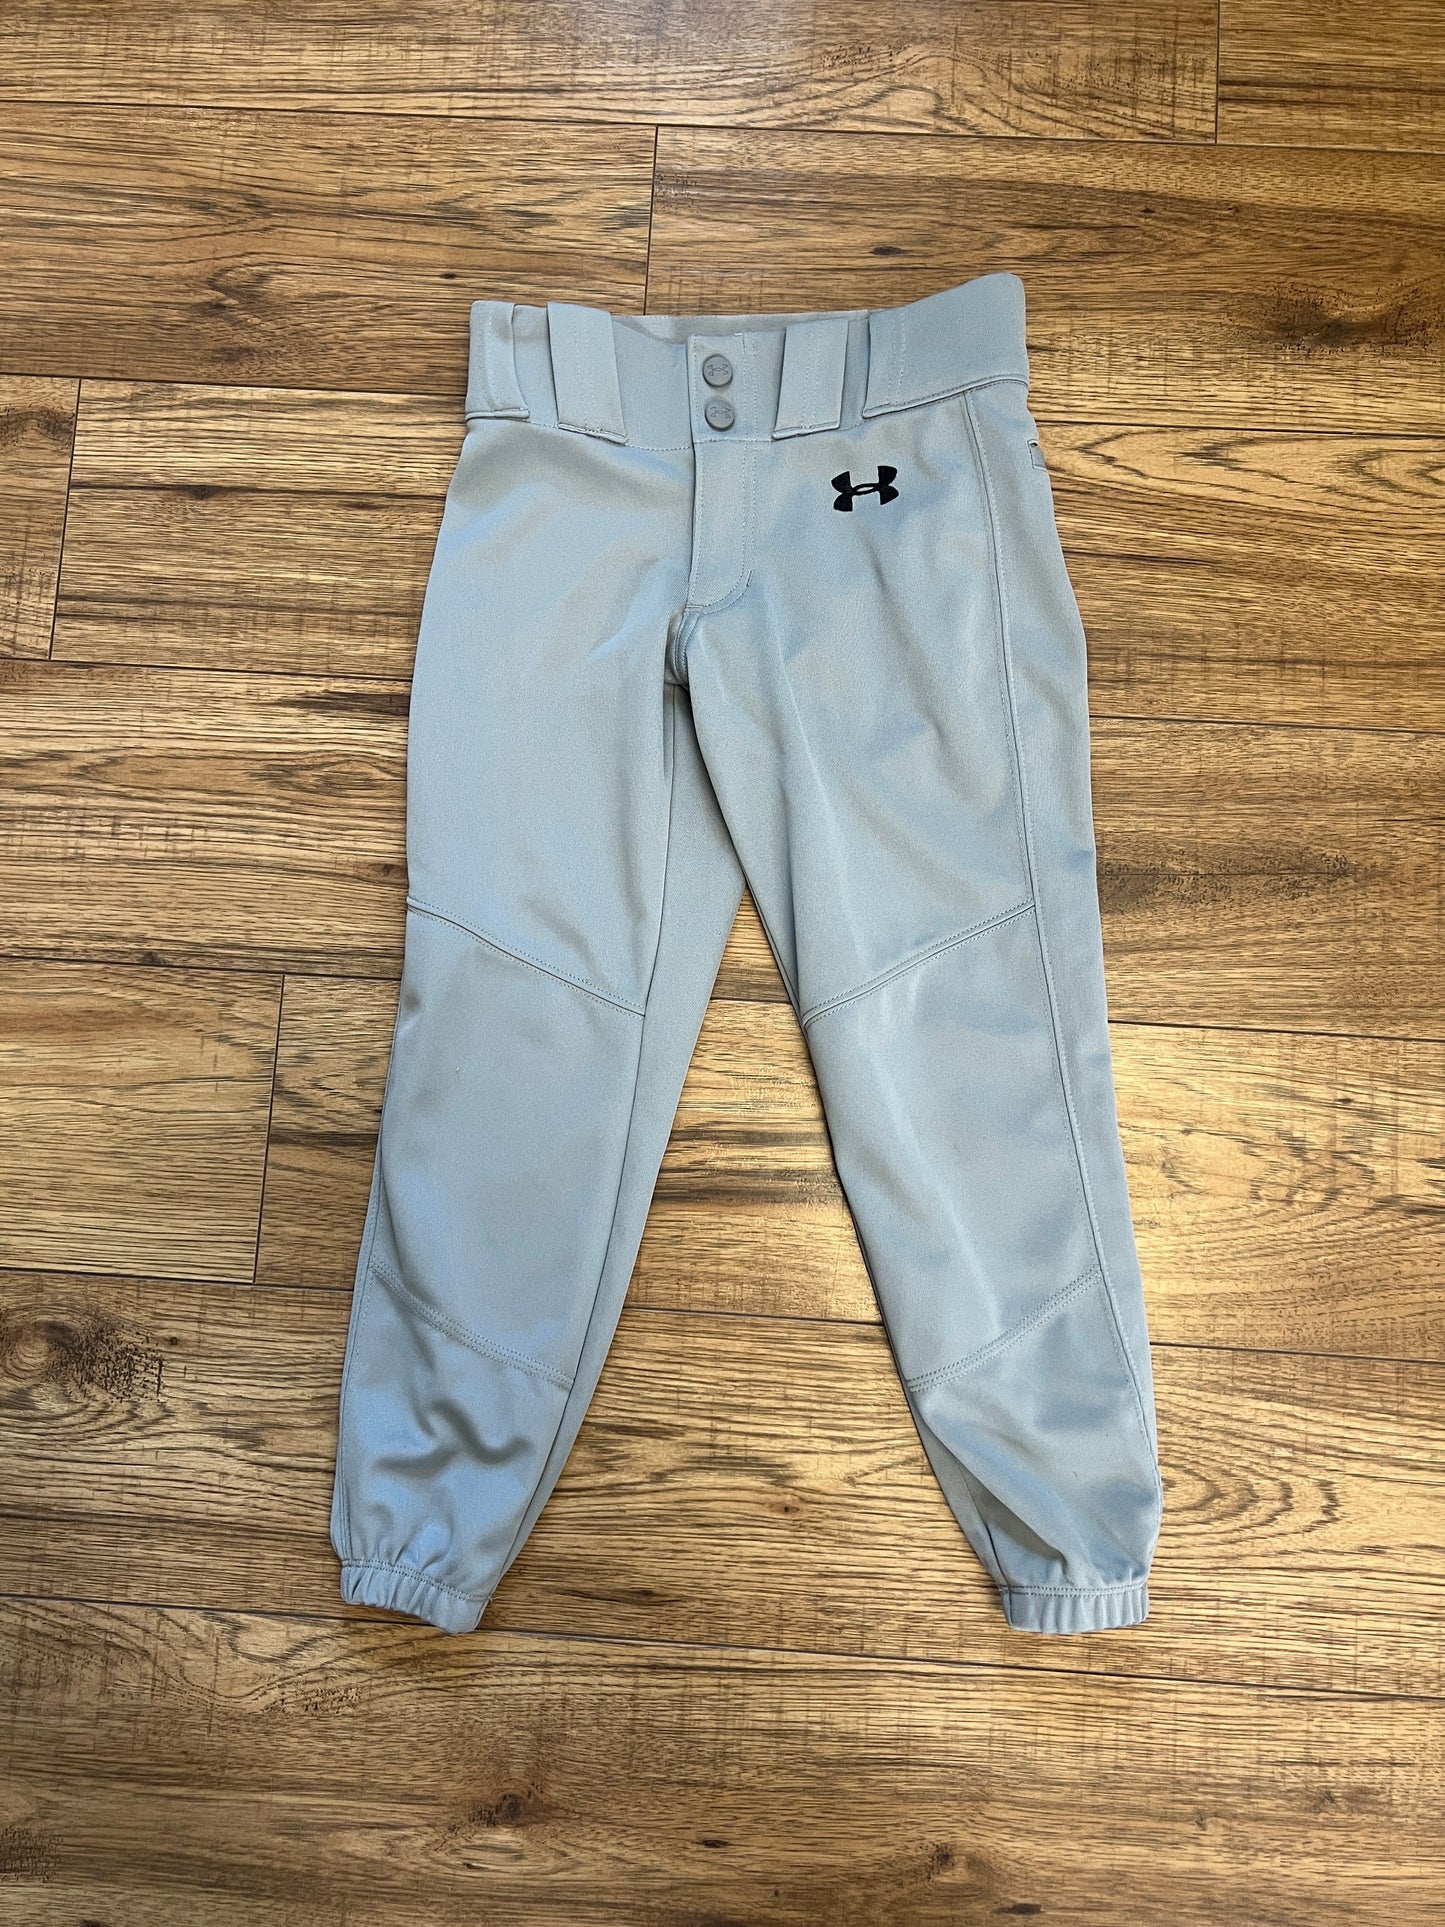 Baseball Pants Child Size 8 XSmall Under Armour Grey Excellent